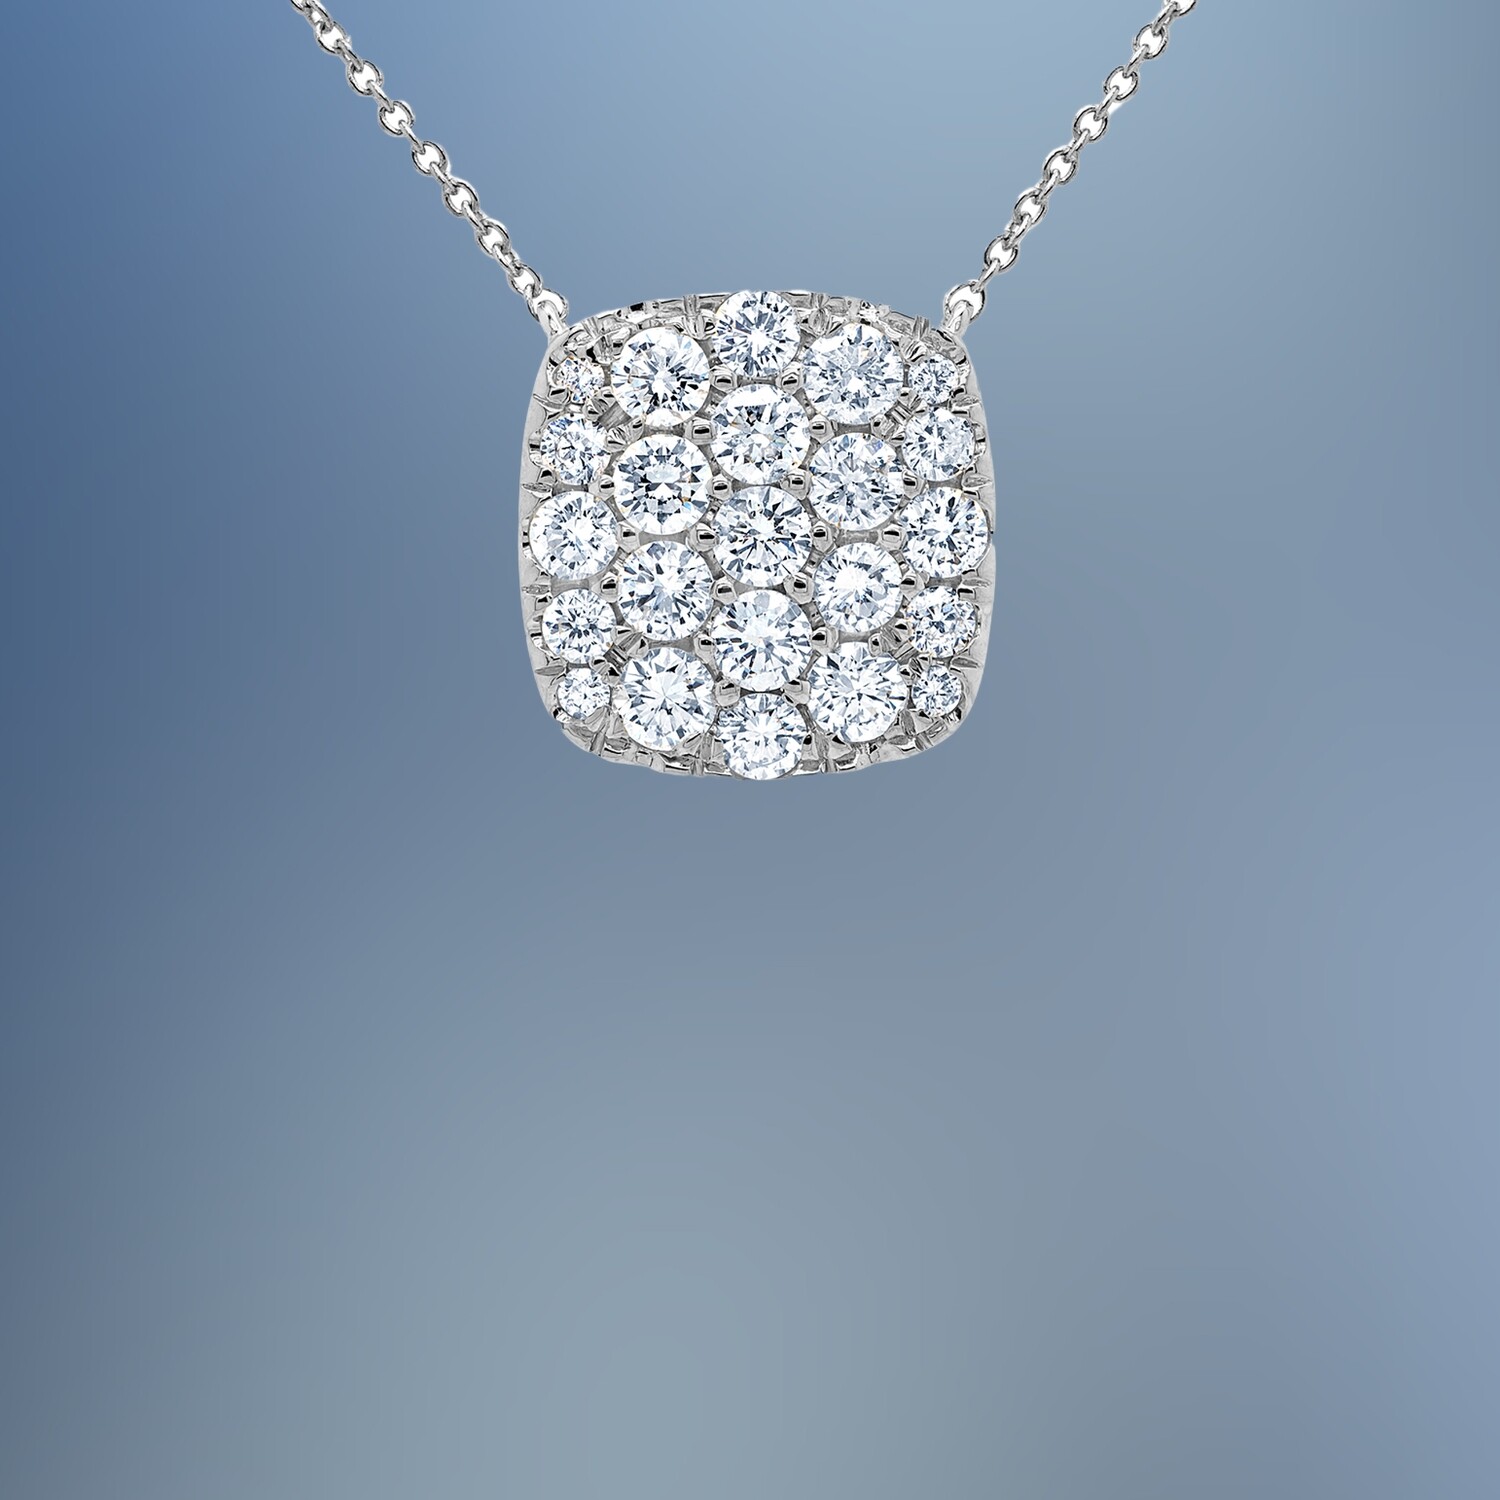 14KT WHITE GOLD DIAMOND PENDANT FEATURING 23 ROUND BRILLIANT CUT DIAMONDS TOTALING 1.09CTS